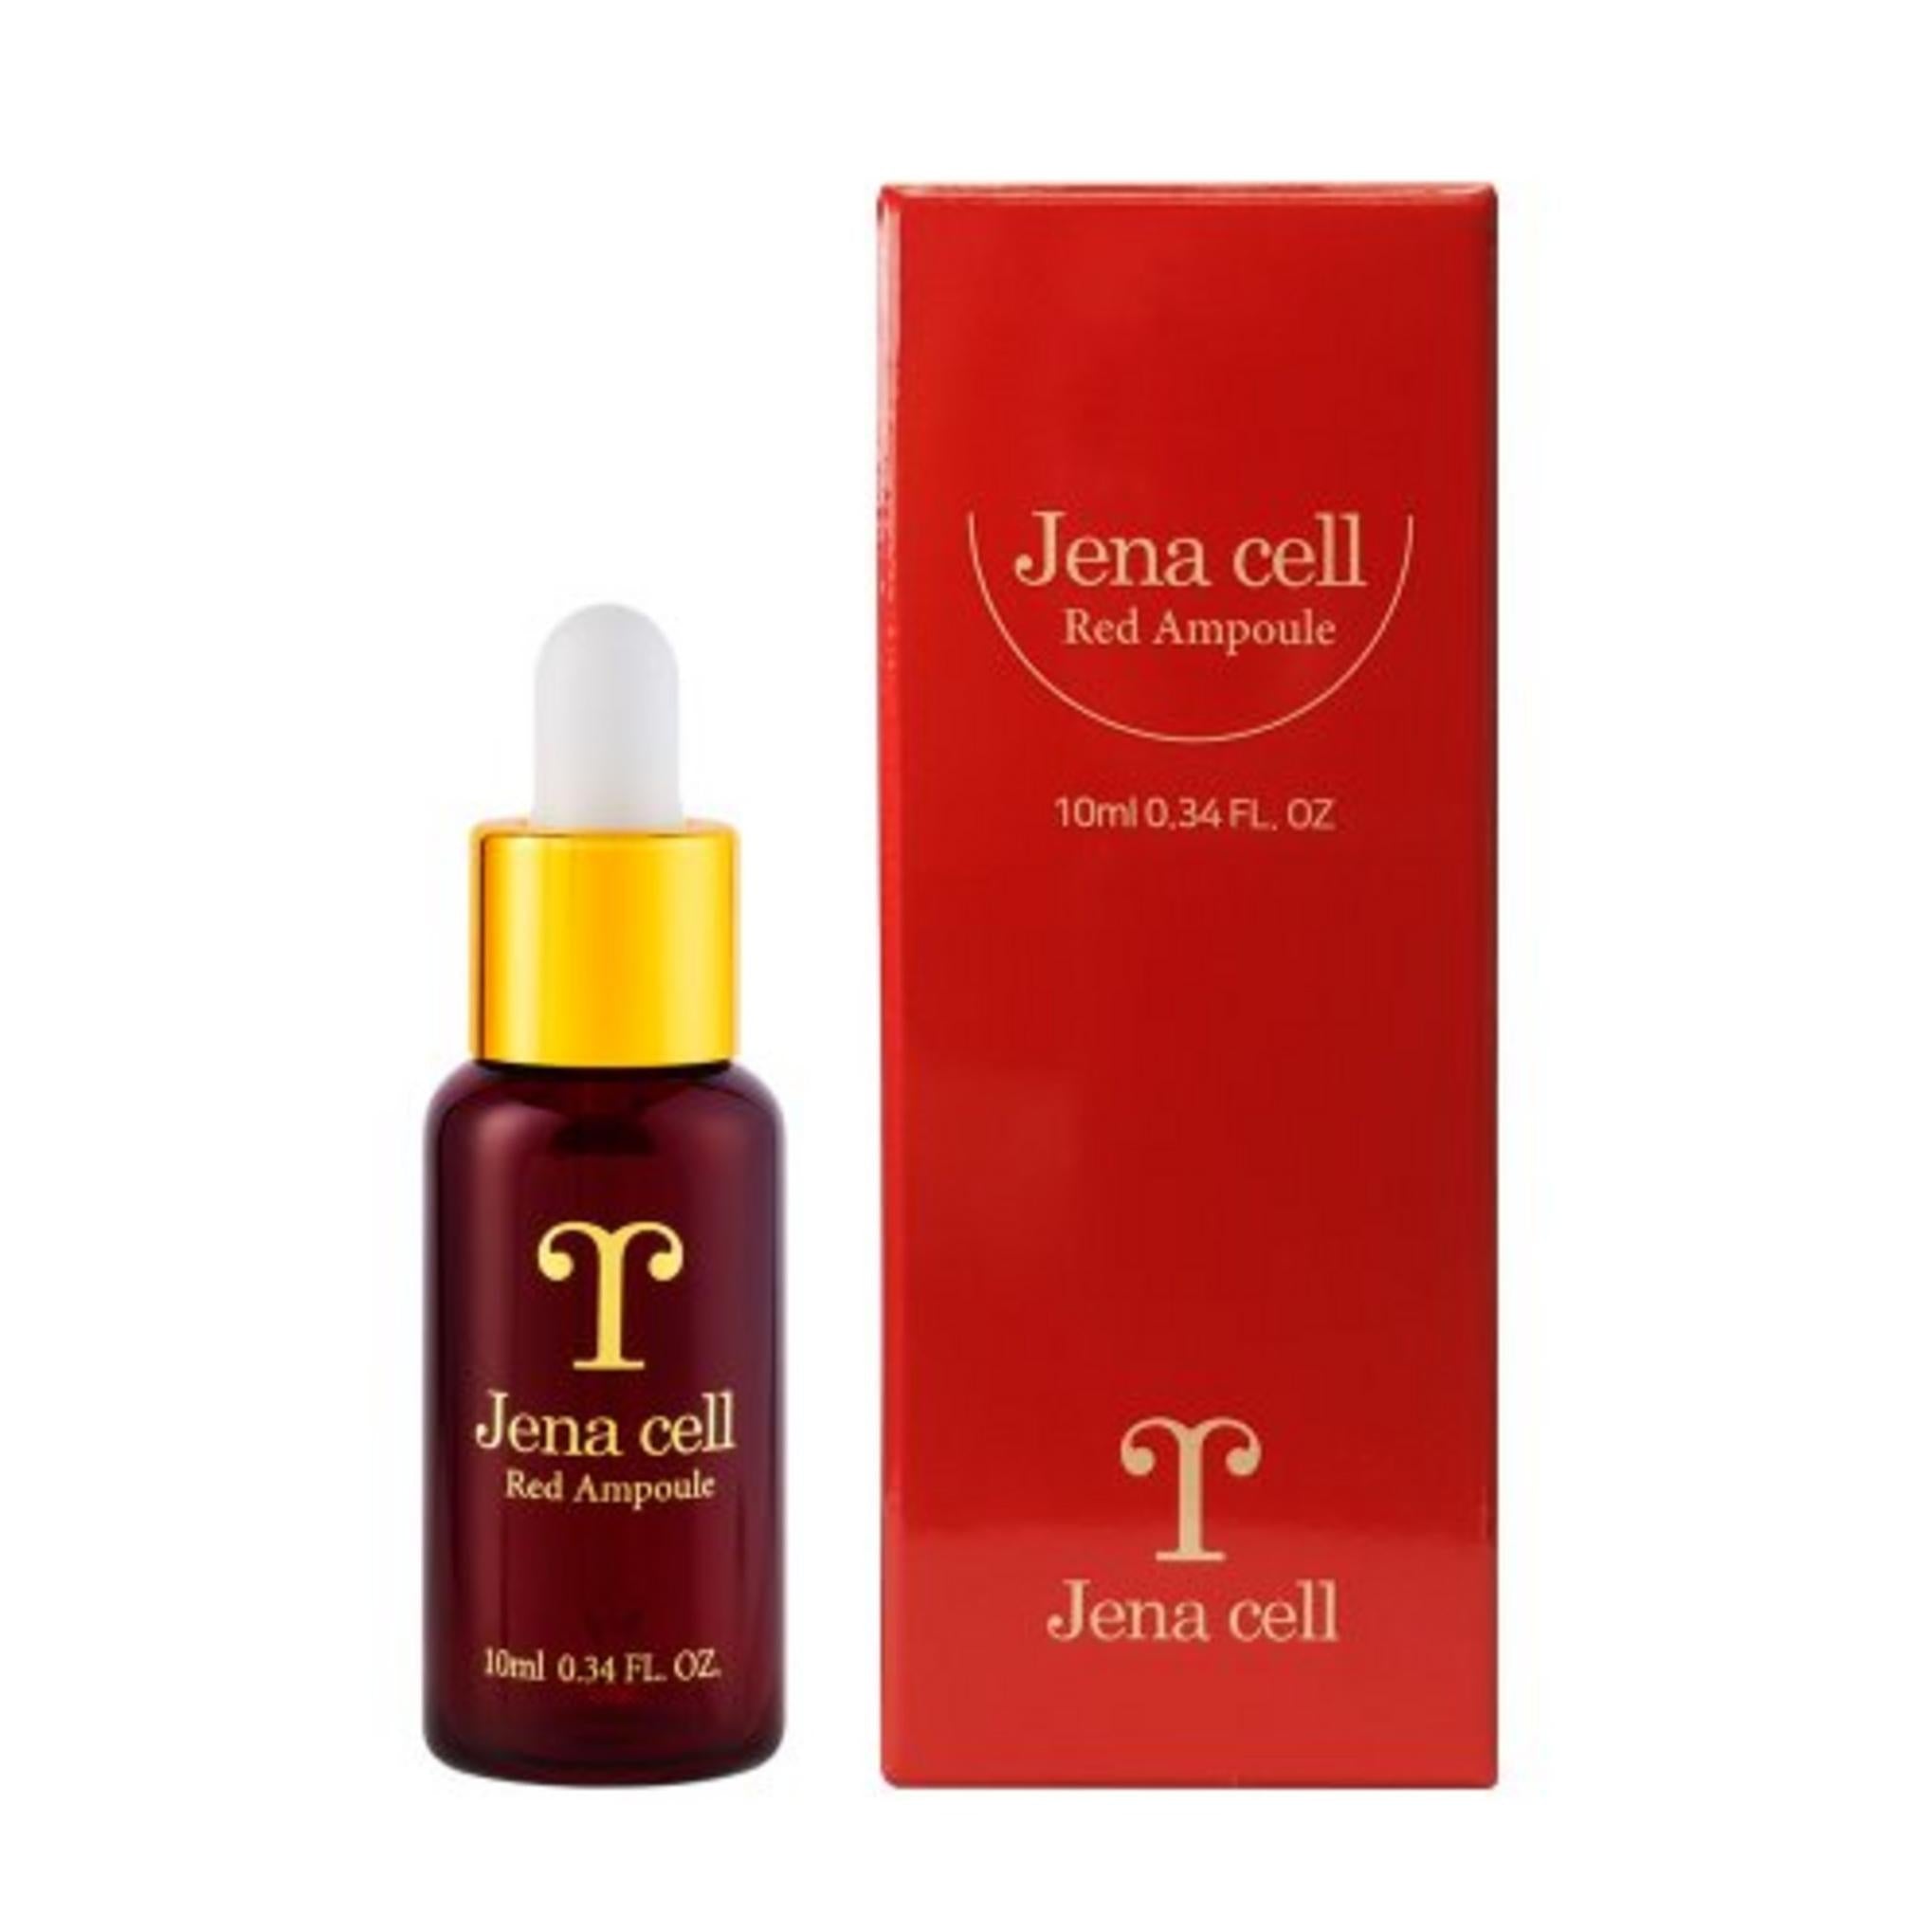 Genacell Supercell Red Ampoule (single item 1 bottle) contains astaxanthin for whitening, wrinkle improvement and antioxidant effect